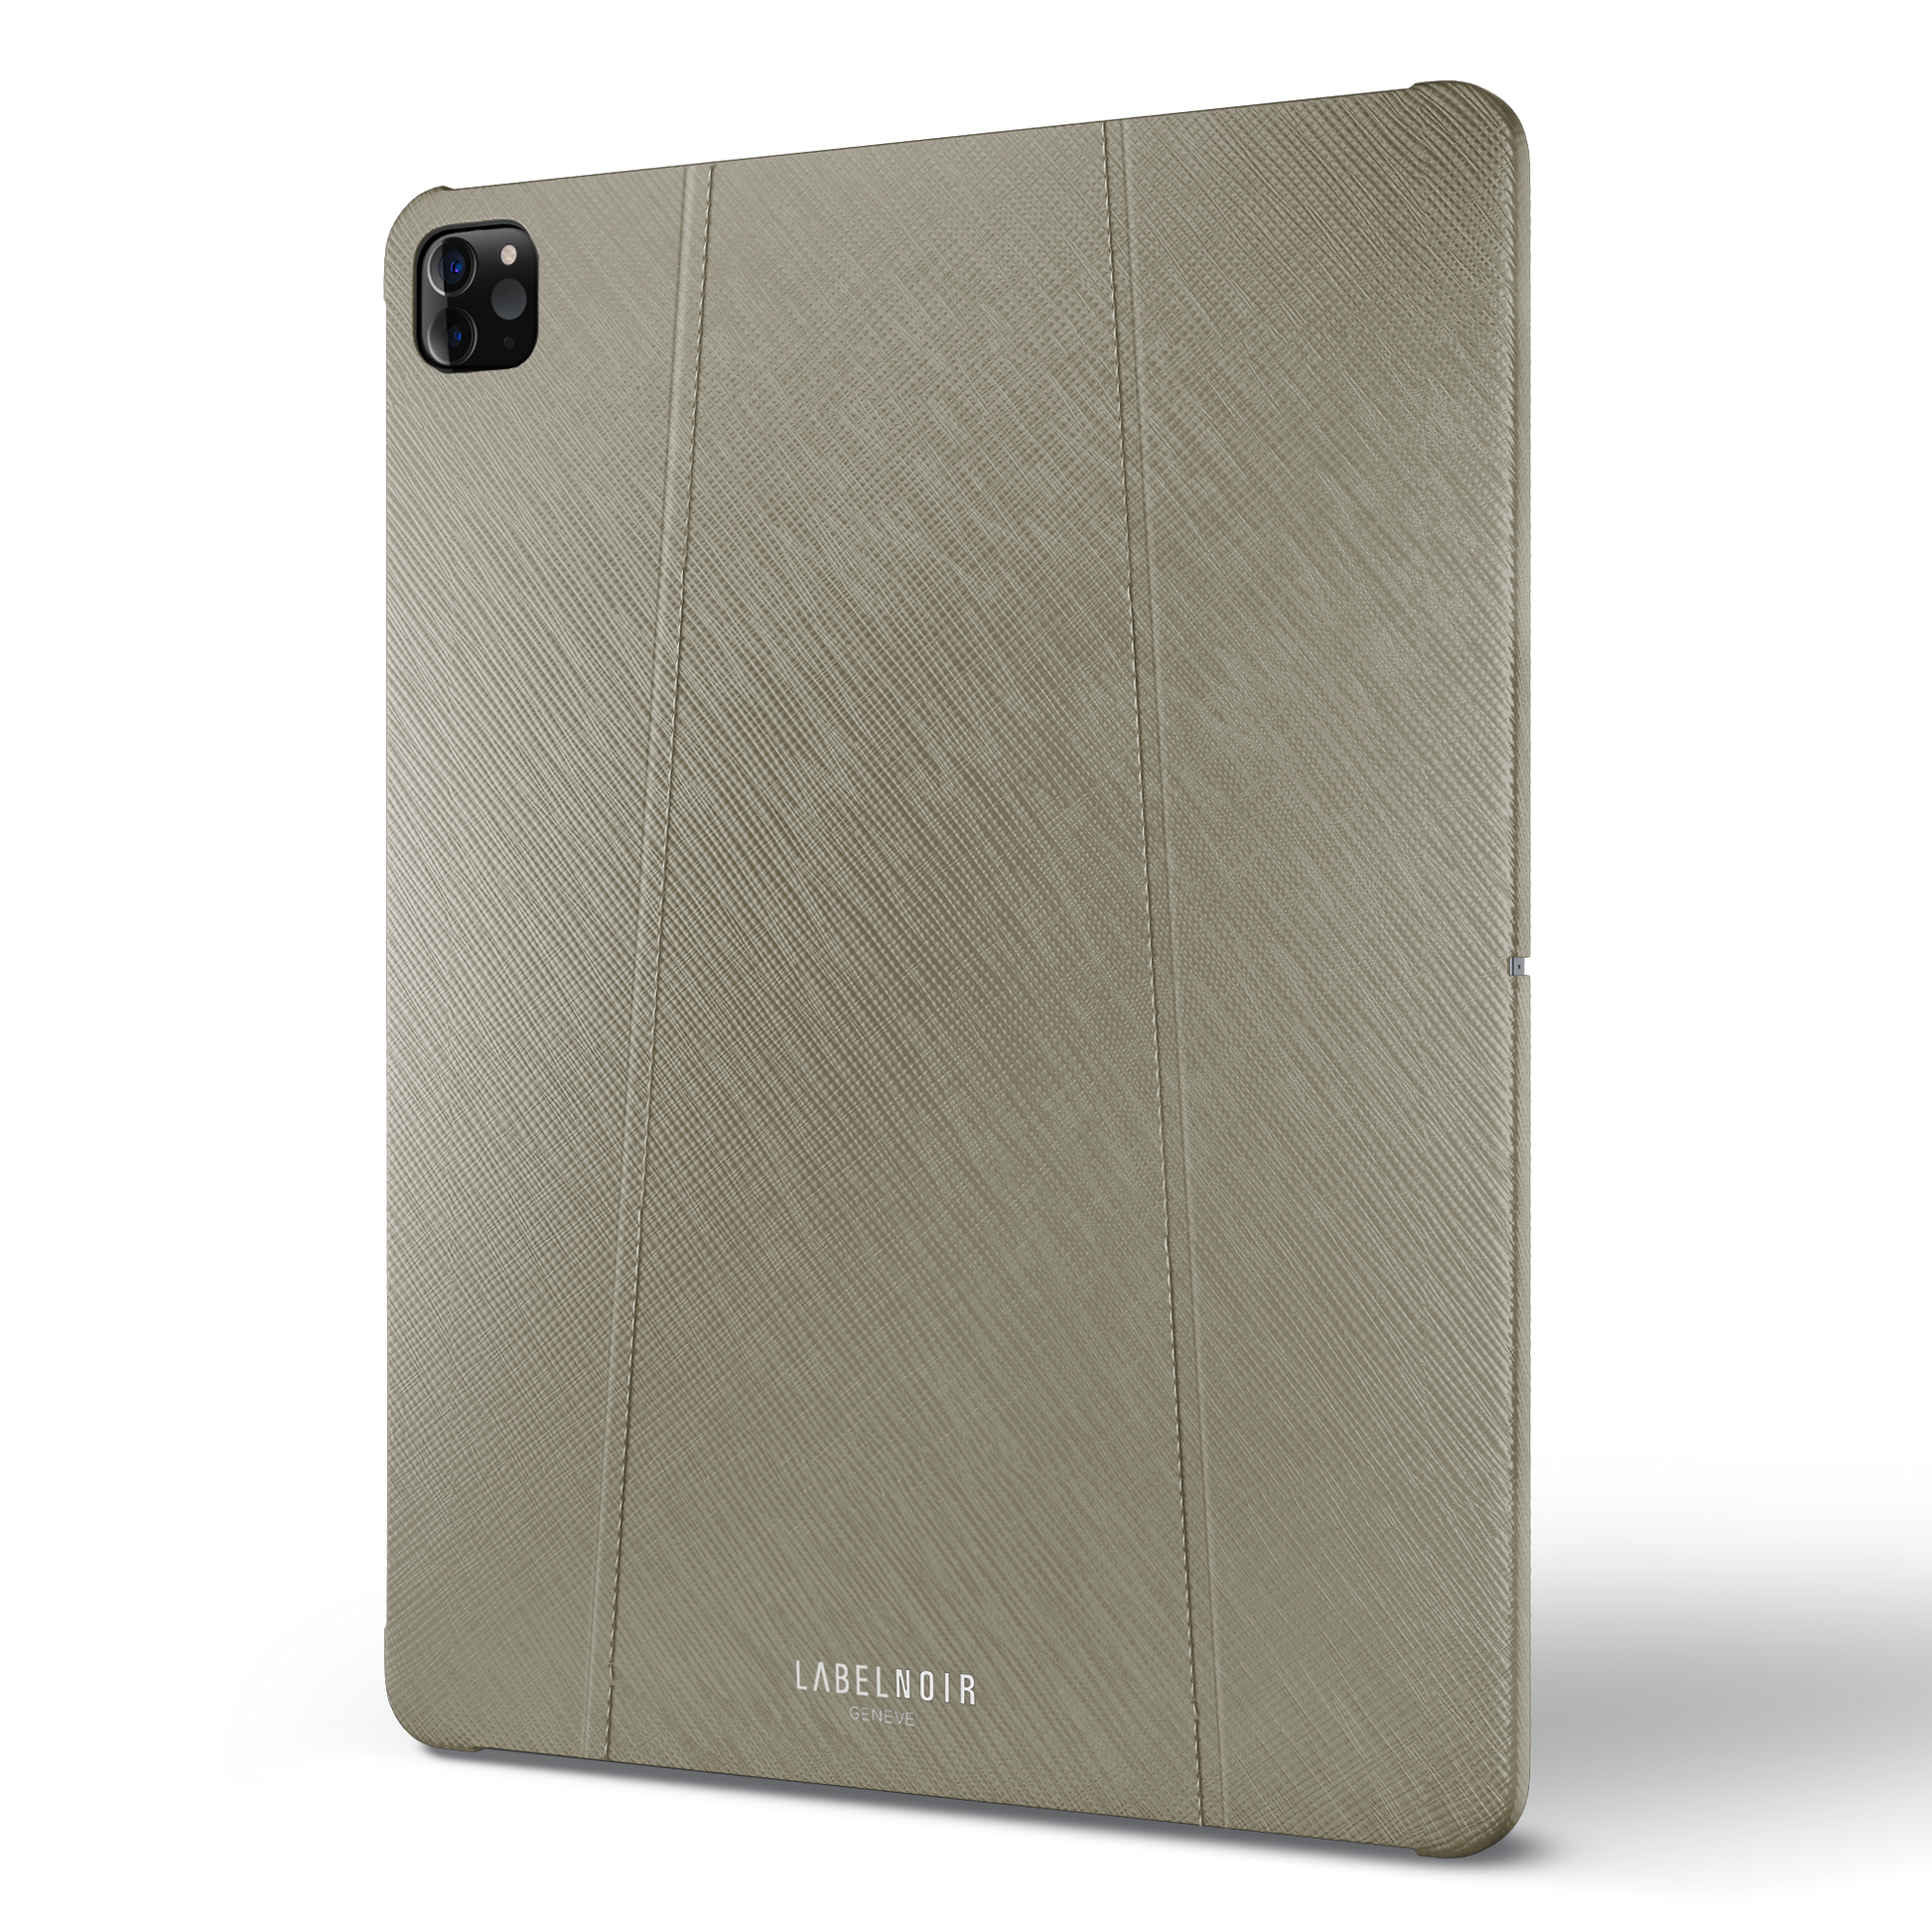 Ipad Pro (2nd-3rd-4th Gen) 11-inch Taupe Saffiano Case